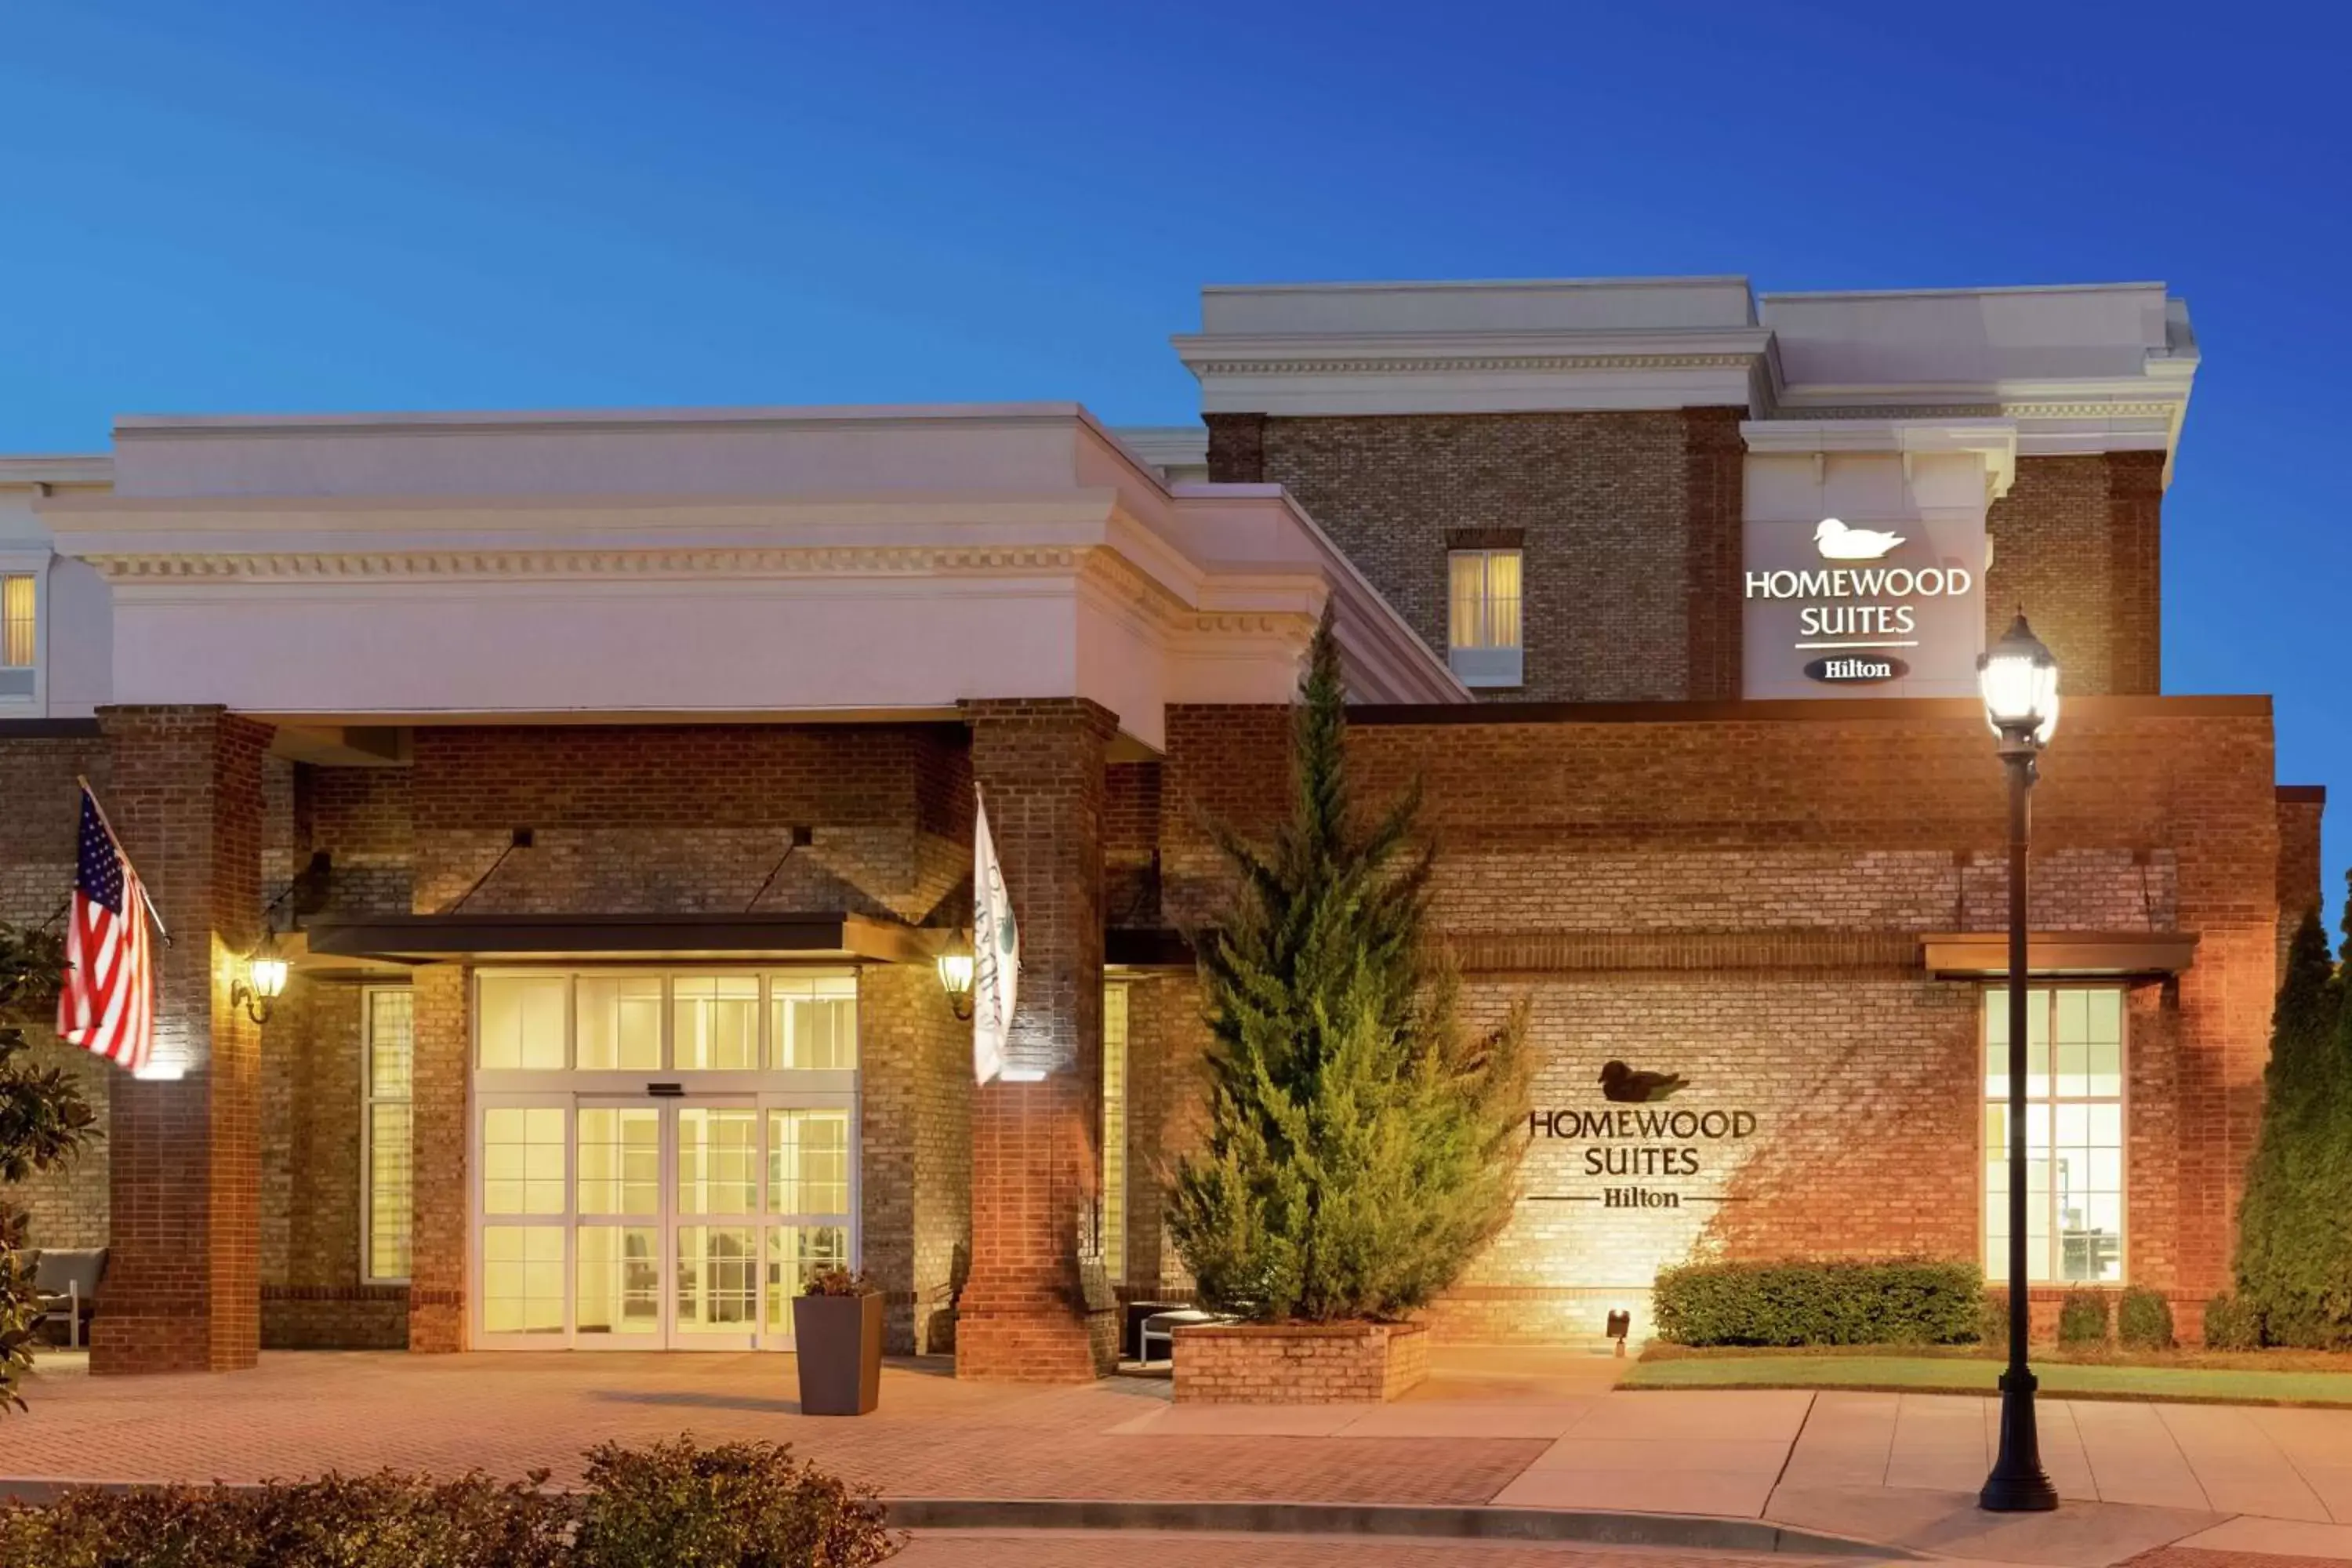 Property Building in Homewood Suites by Hilton Macon-North